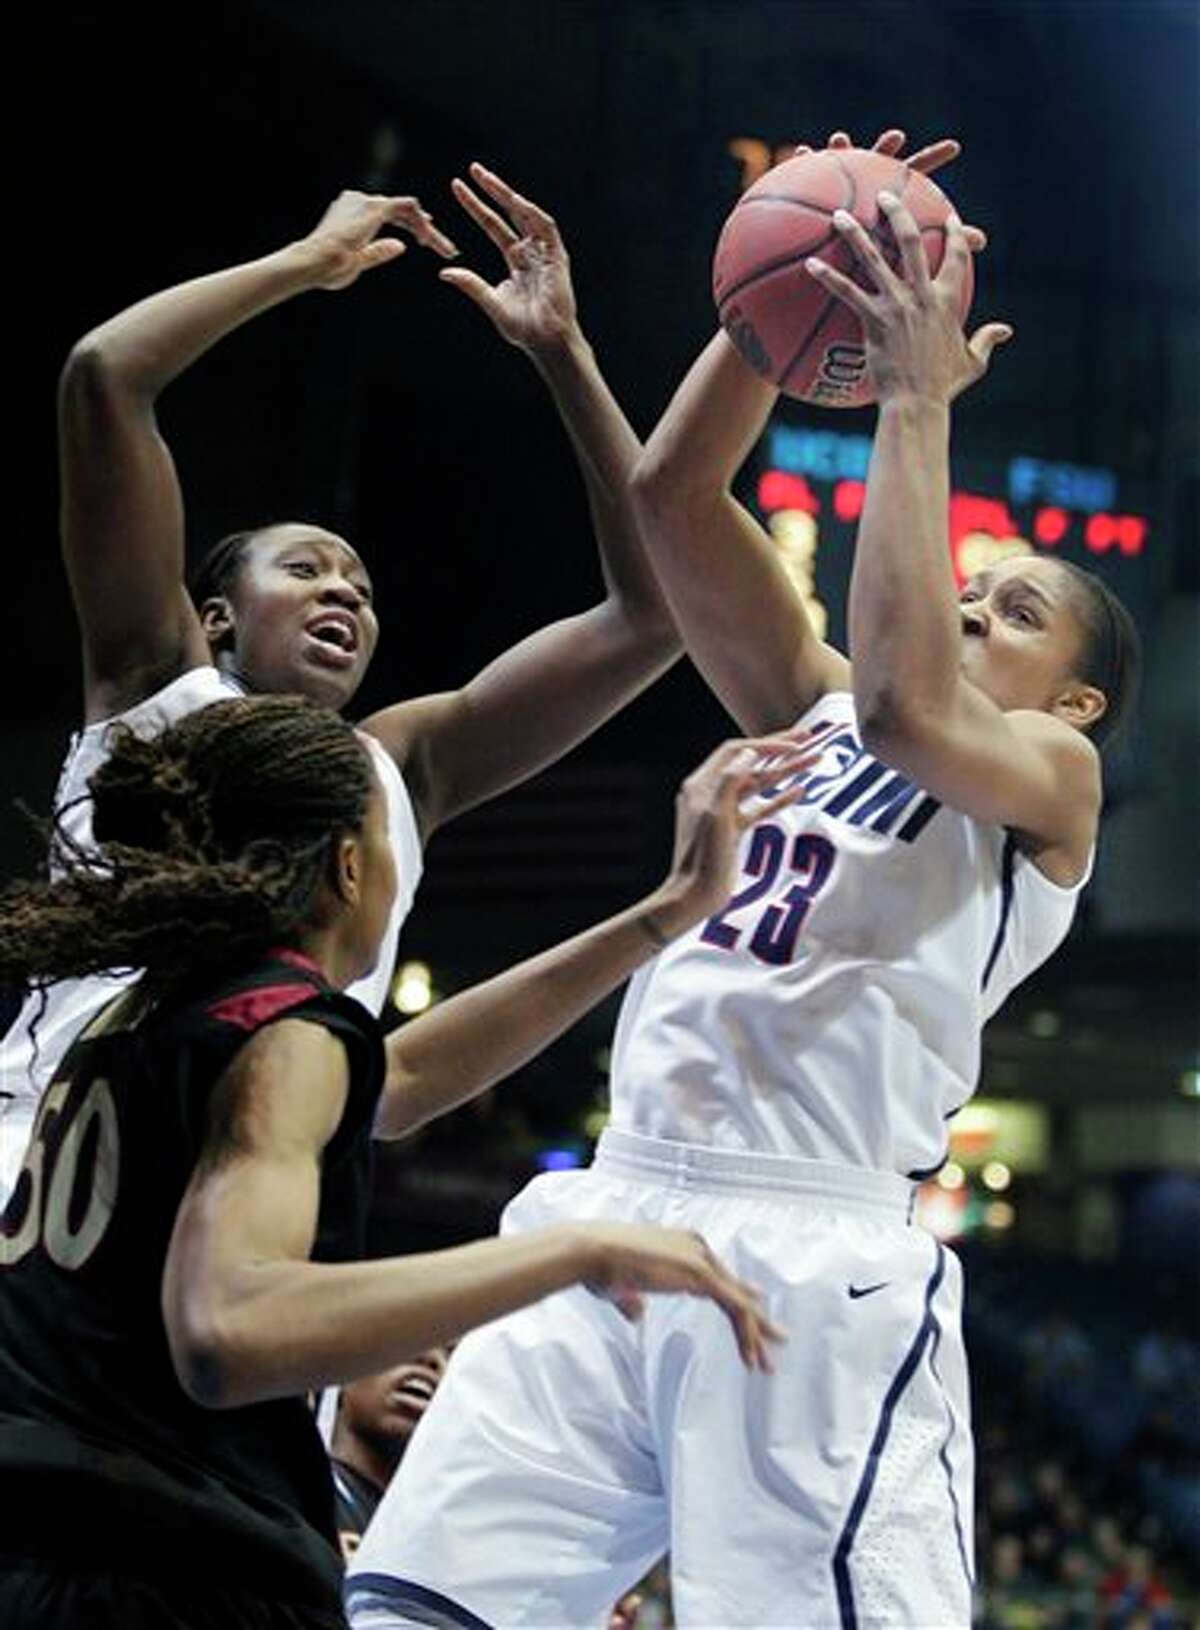 Connecticut's Maya Moore (23) grabs a rebound in front of Florida State's Chasity Clayton in the first half of the NCAA Dayton Regional final college basketball game Tuesday, March 30, 2010, in Dayton, Ohio. (AP Photo/Skip Peterson)